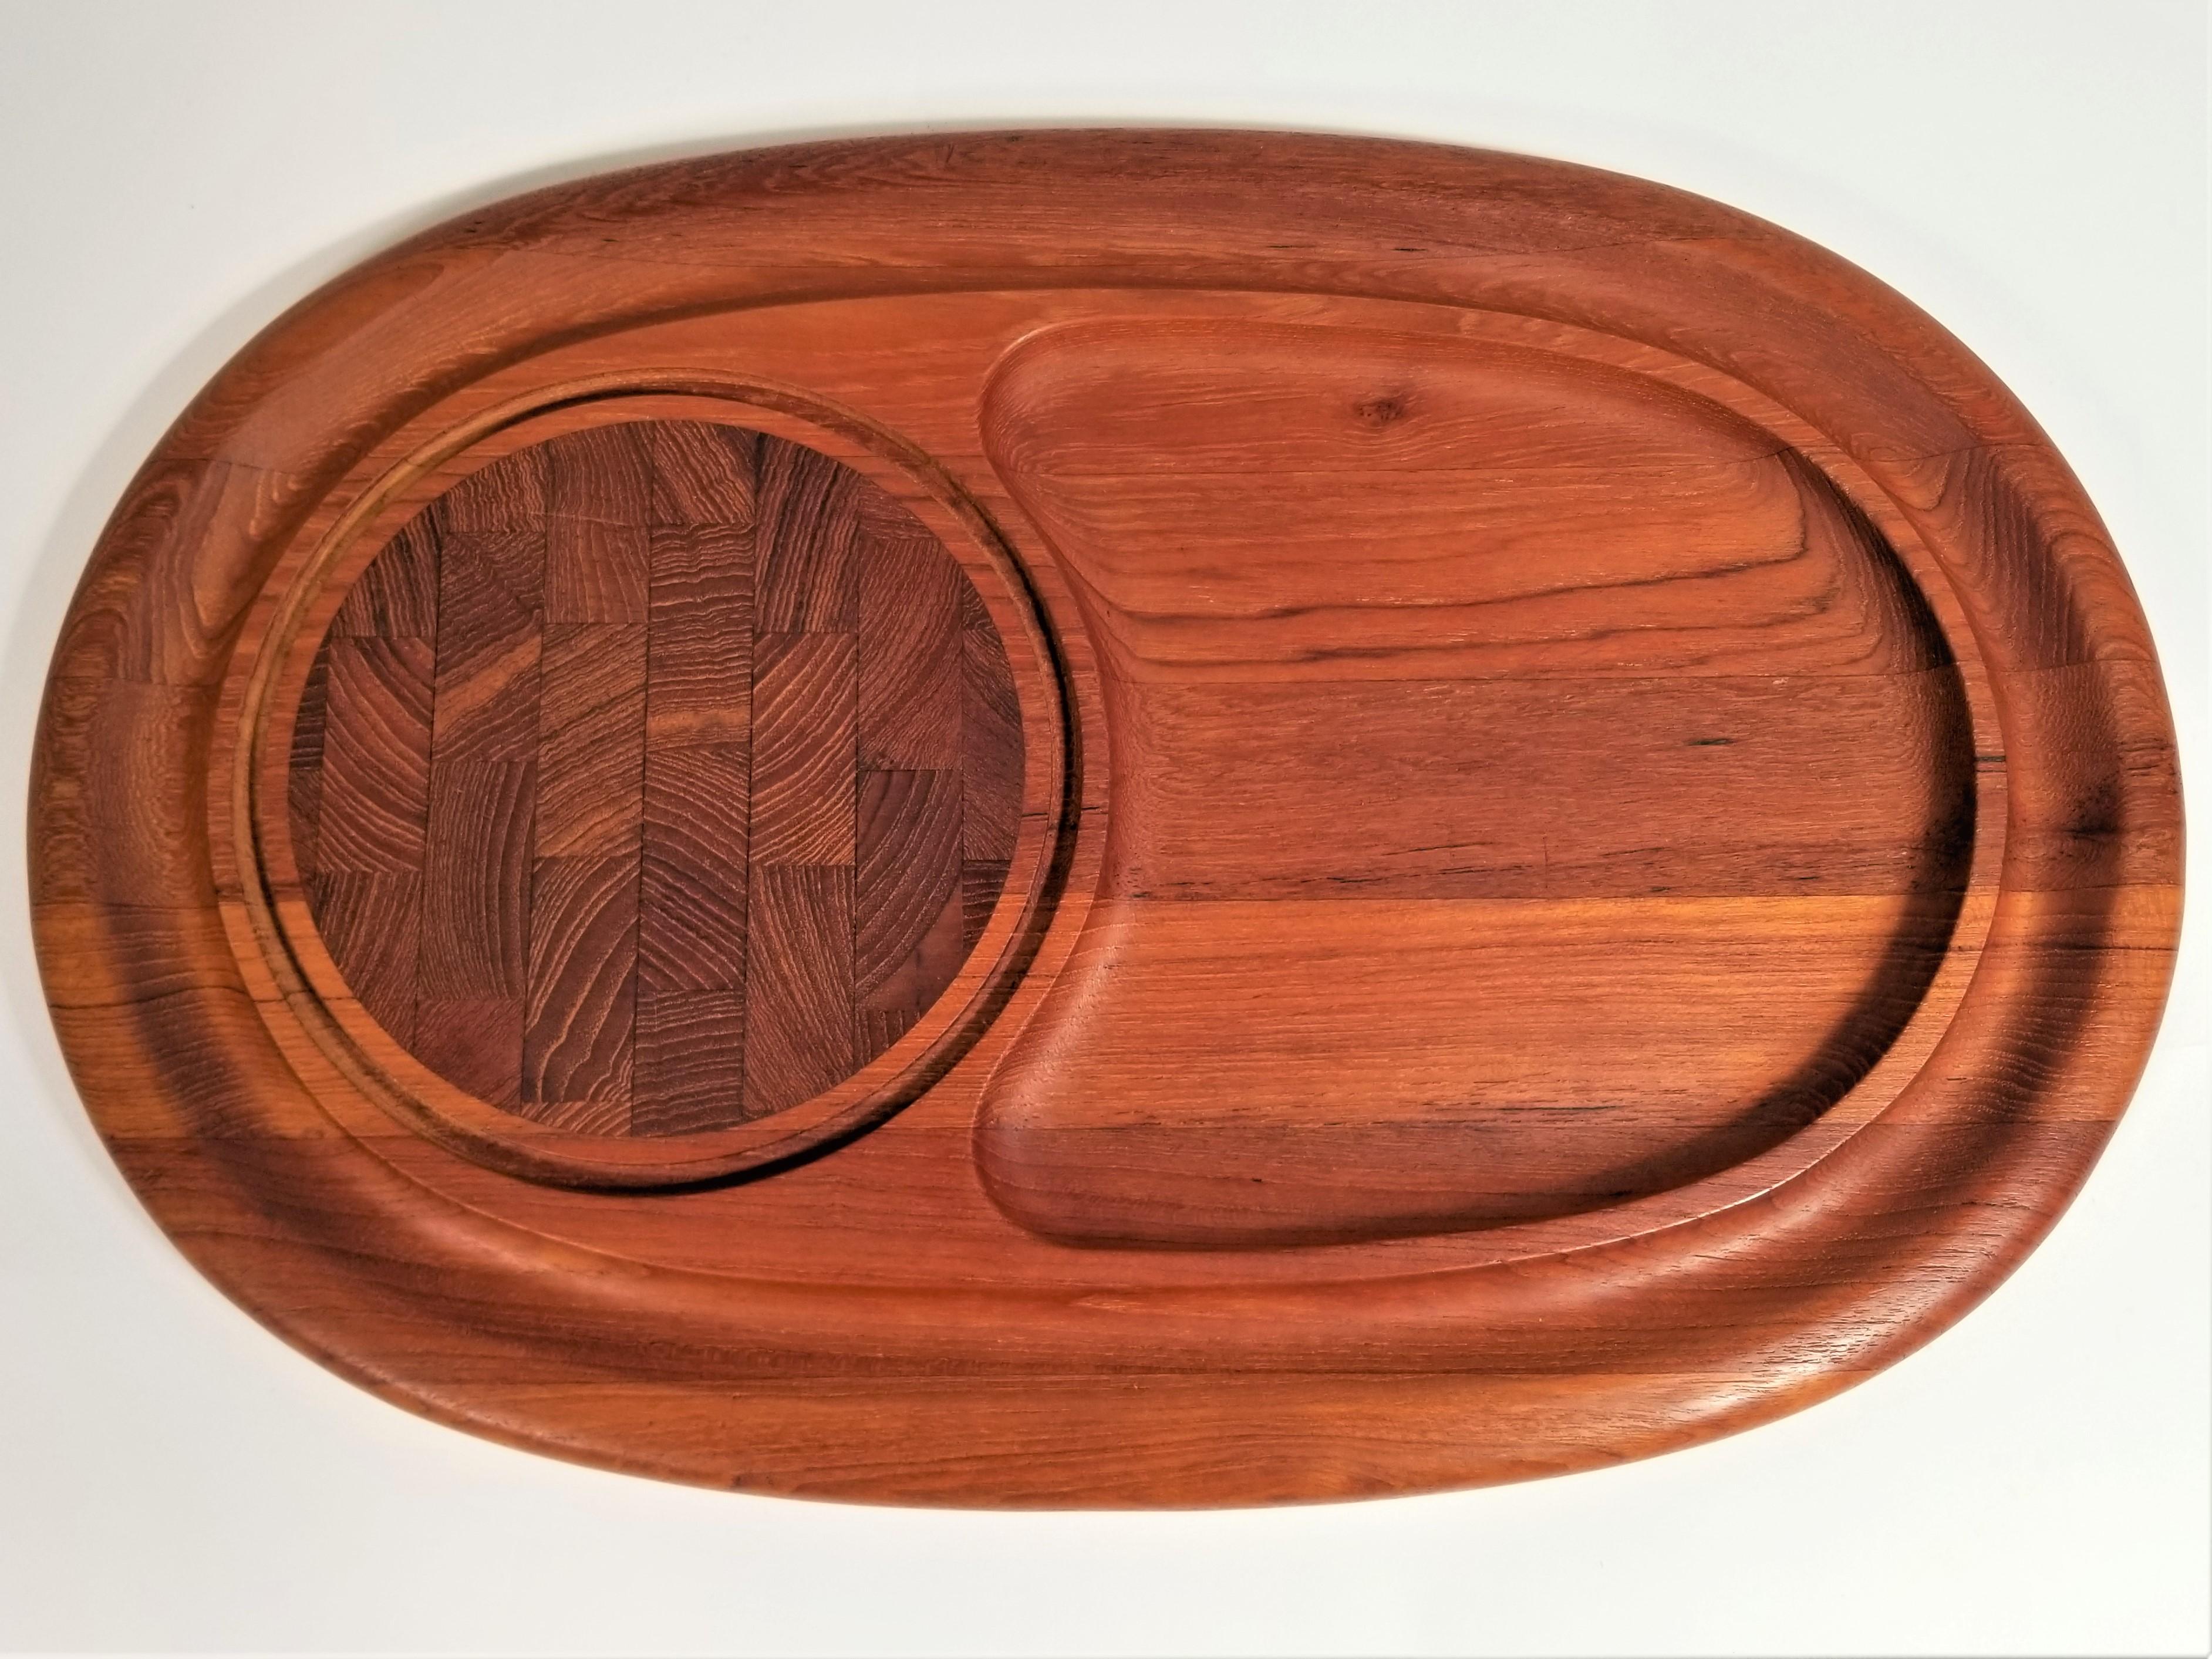 Midcentury 1960s signed Jens Quistgaard Dansk teak tray. Cheese or charcuterie. Board.